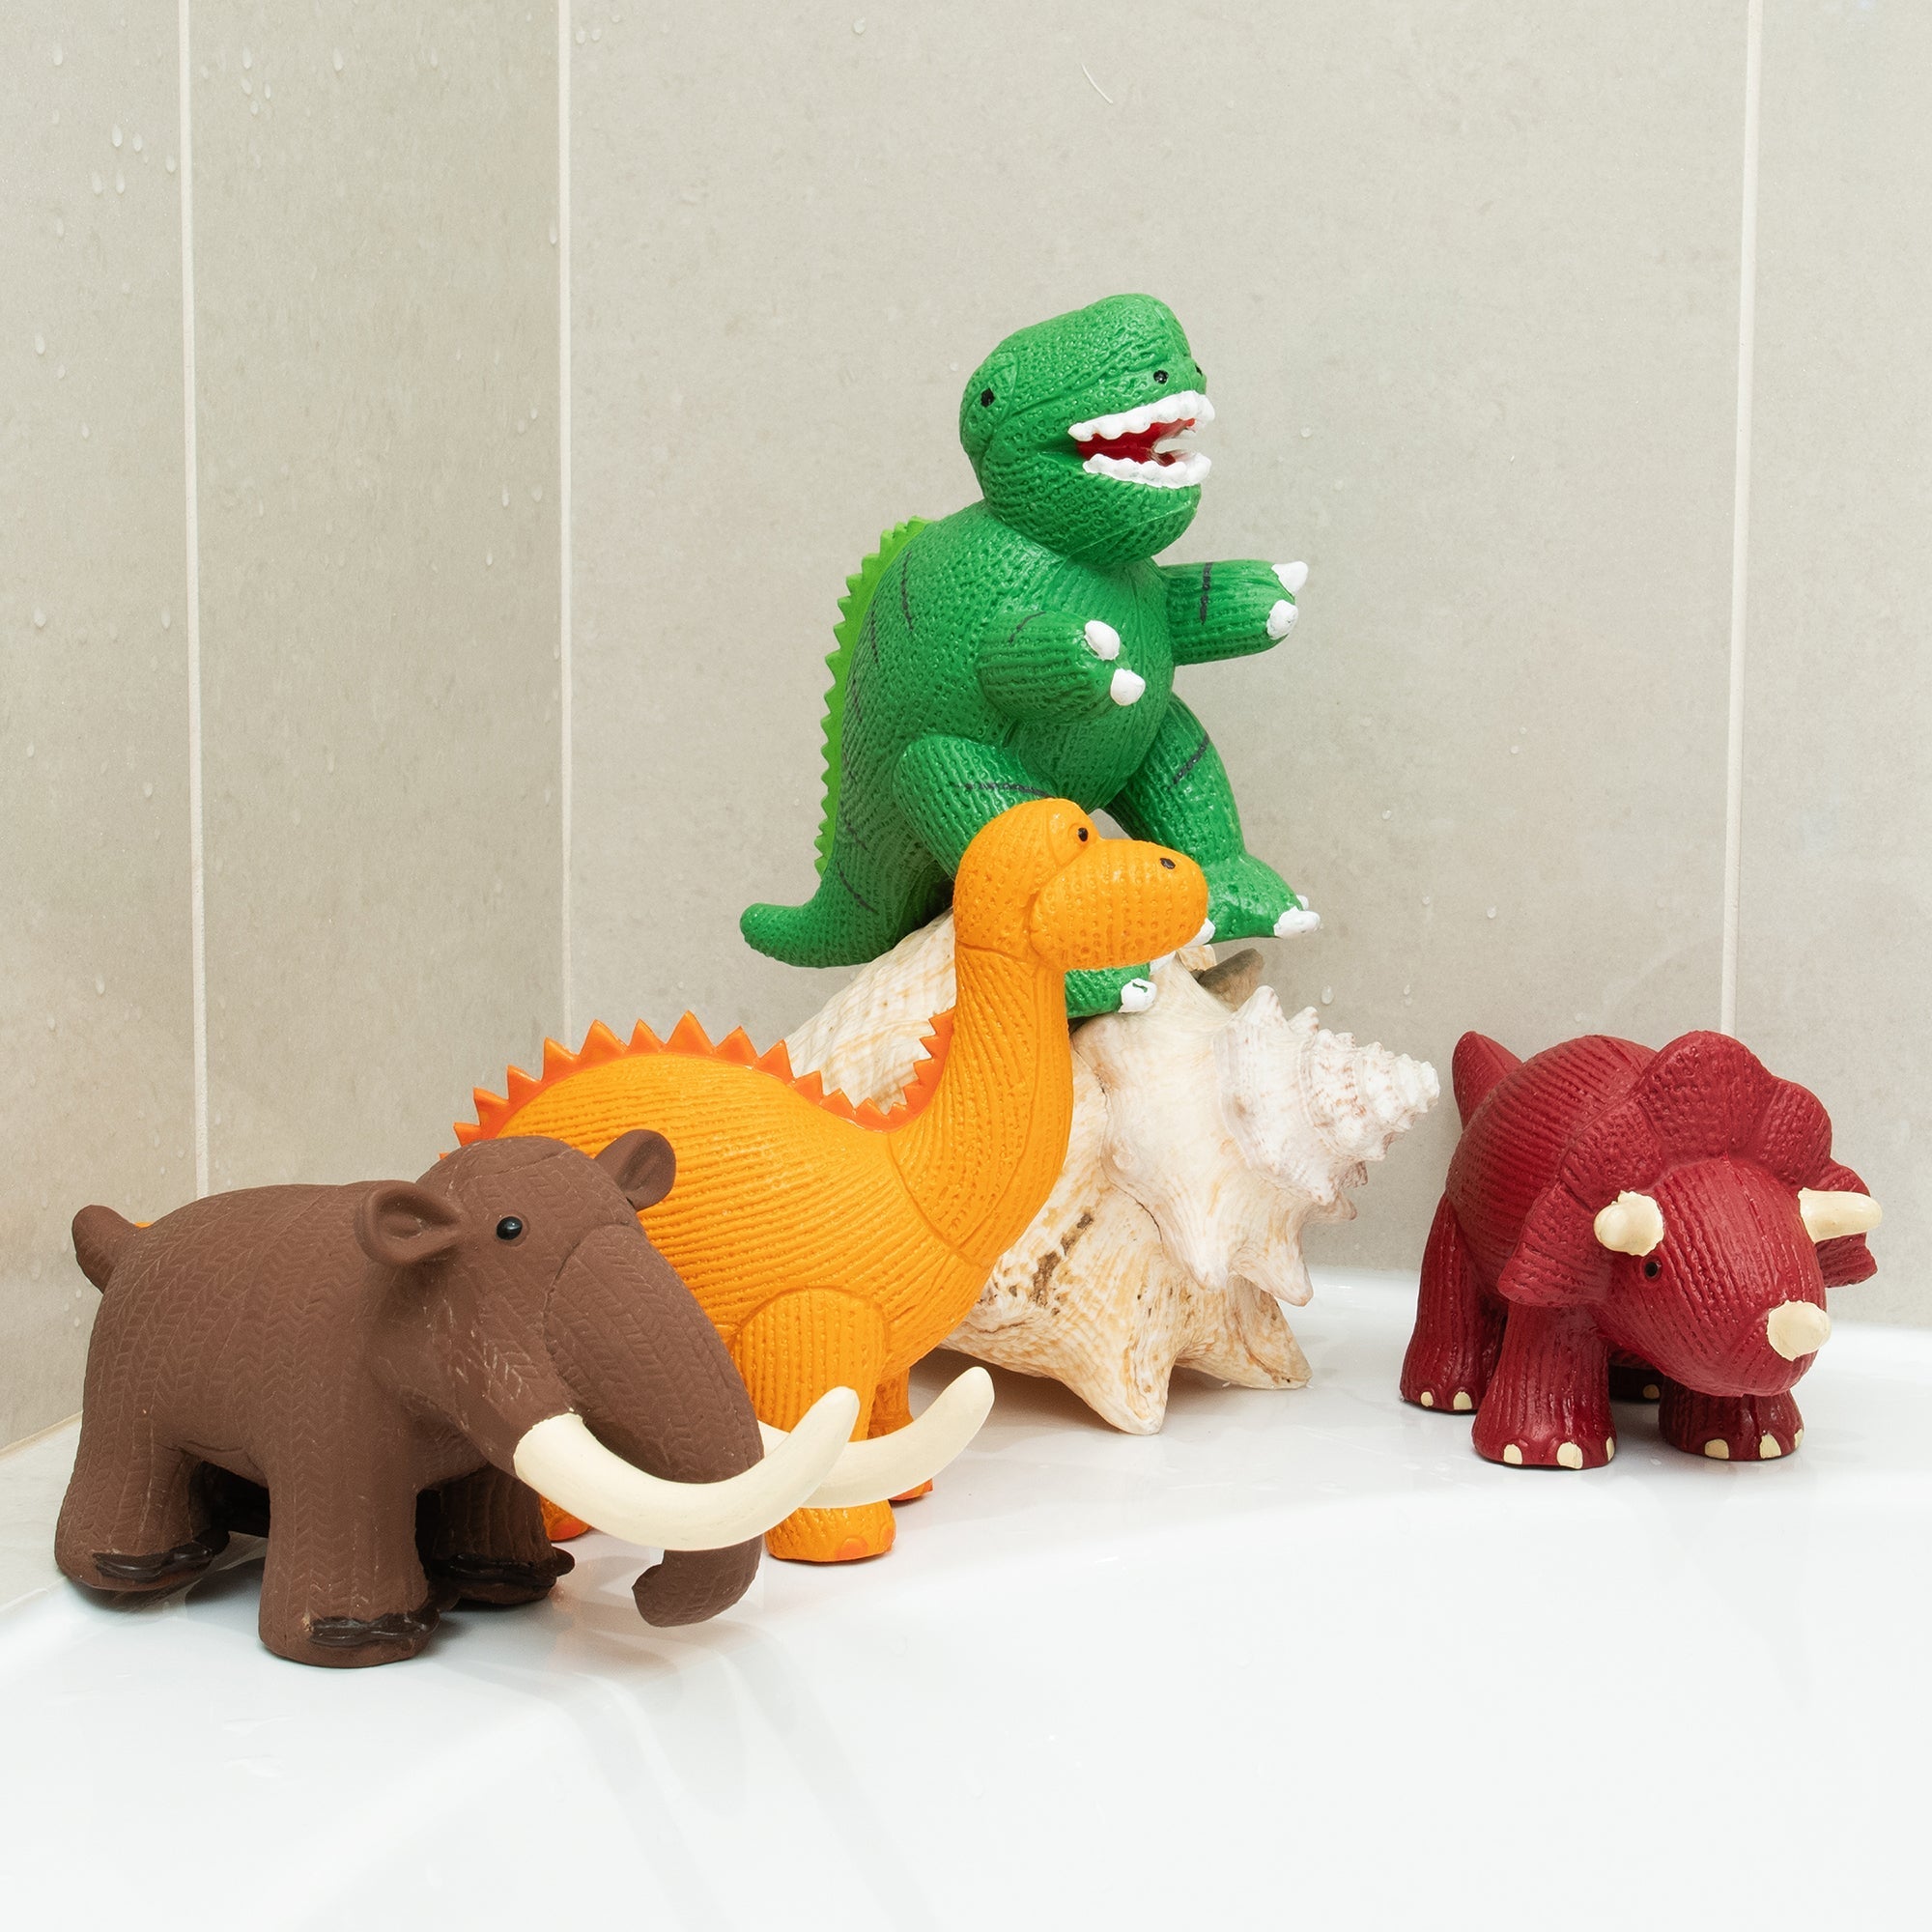 Woolly Mammoth - Natural Rubber Dinosaur Teether & Bath Toy